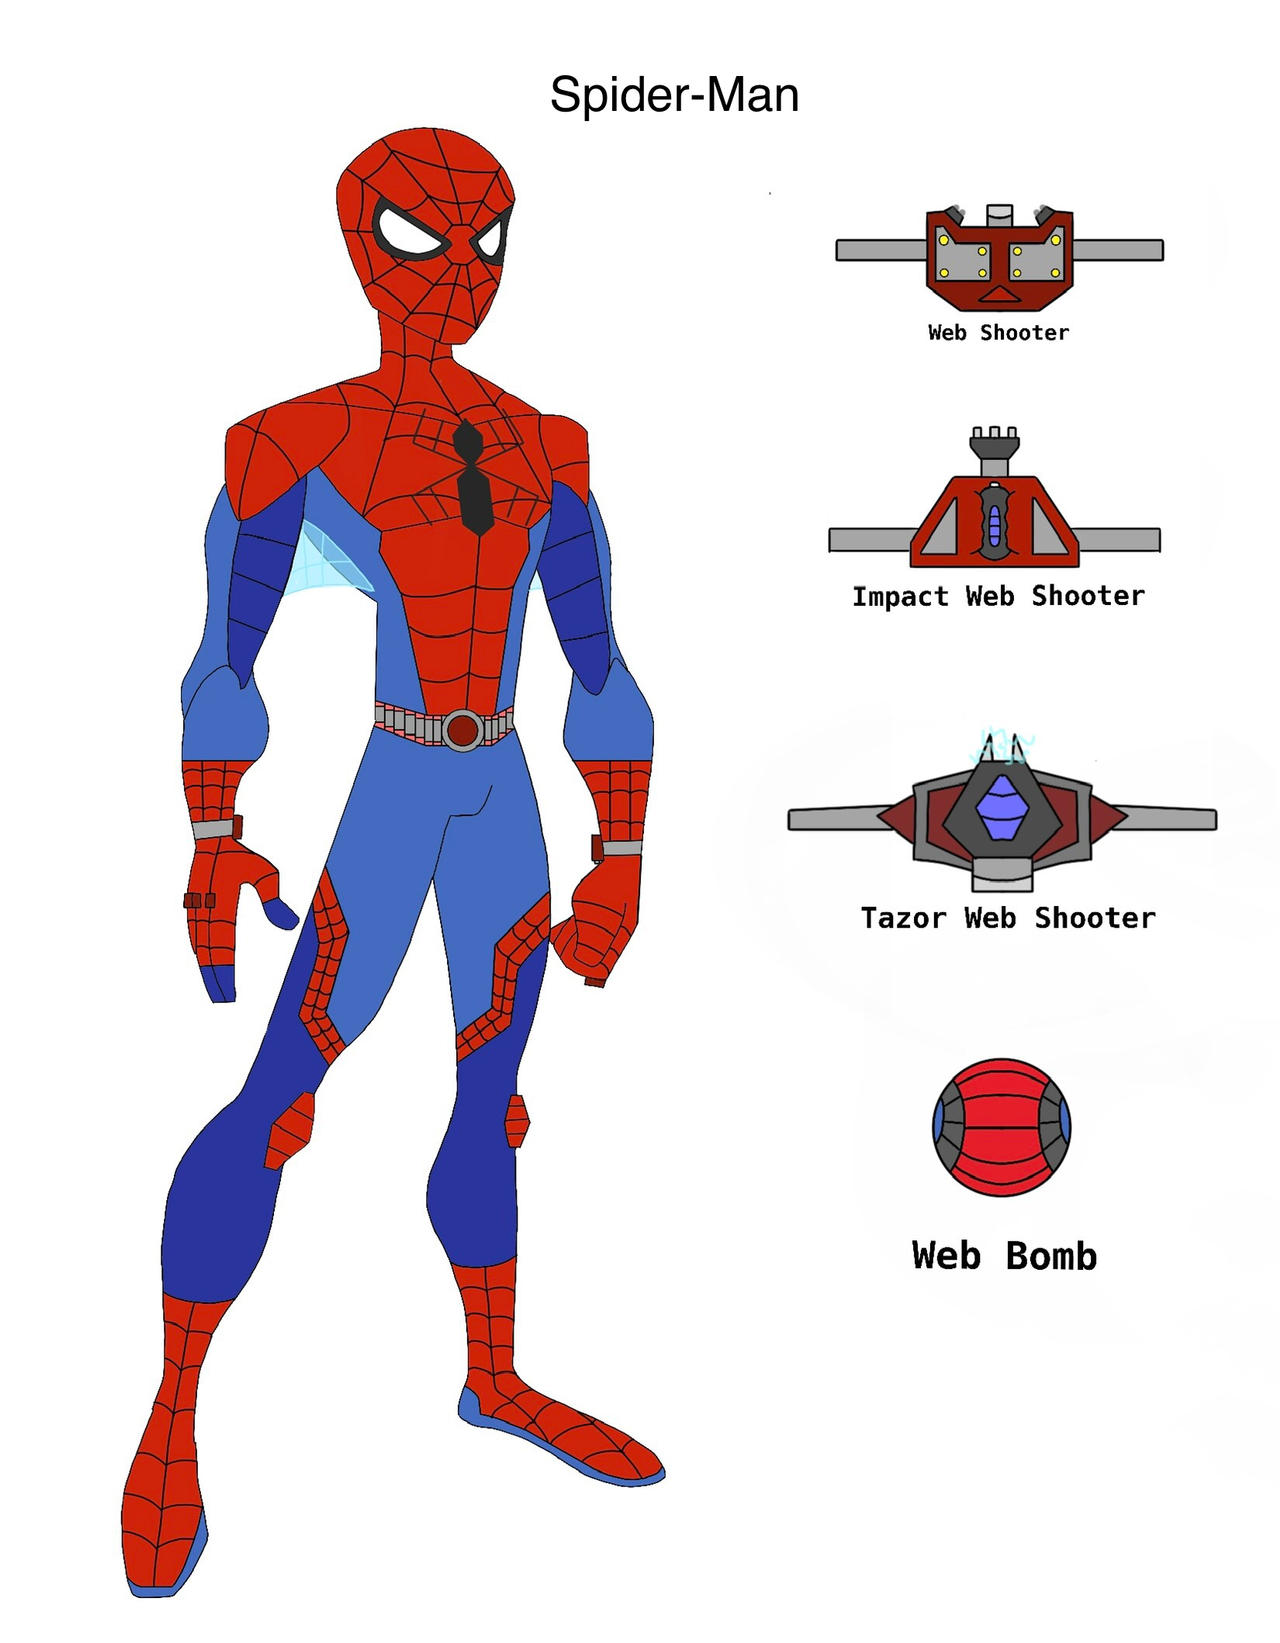 How to Build Spider-Man (Web of Shadows) by Bluespider17 on DeviantArt